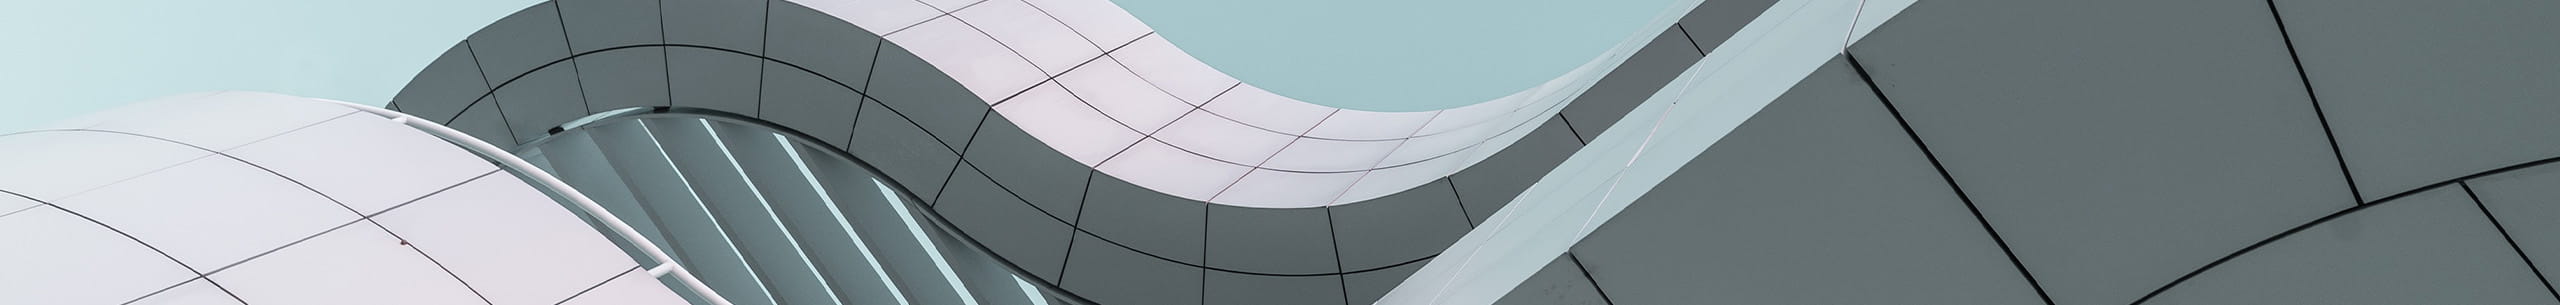 Picture of a curved building window